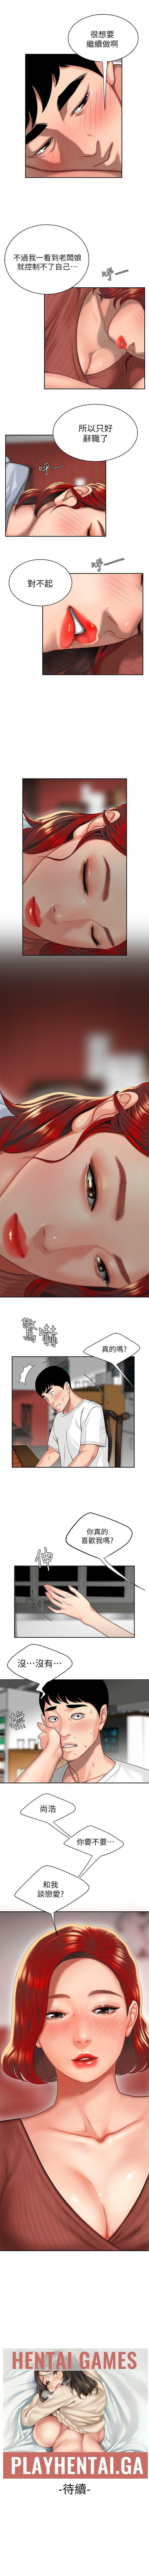 DELIVERY MAN | 幸福外卖员 Ch. 1 8